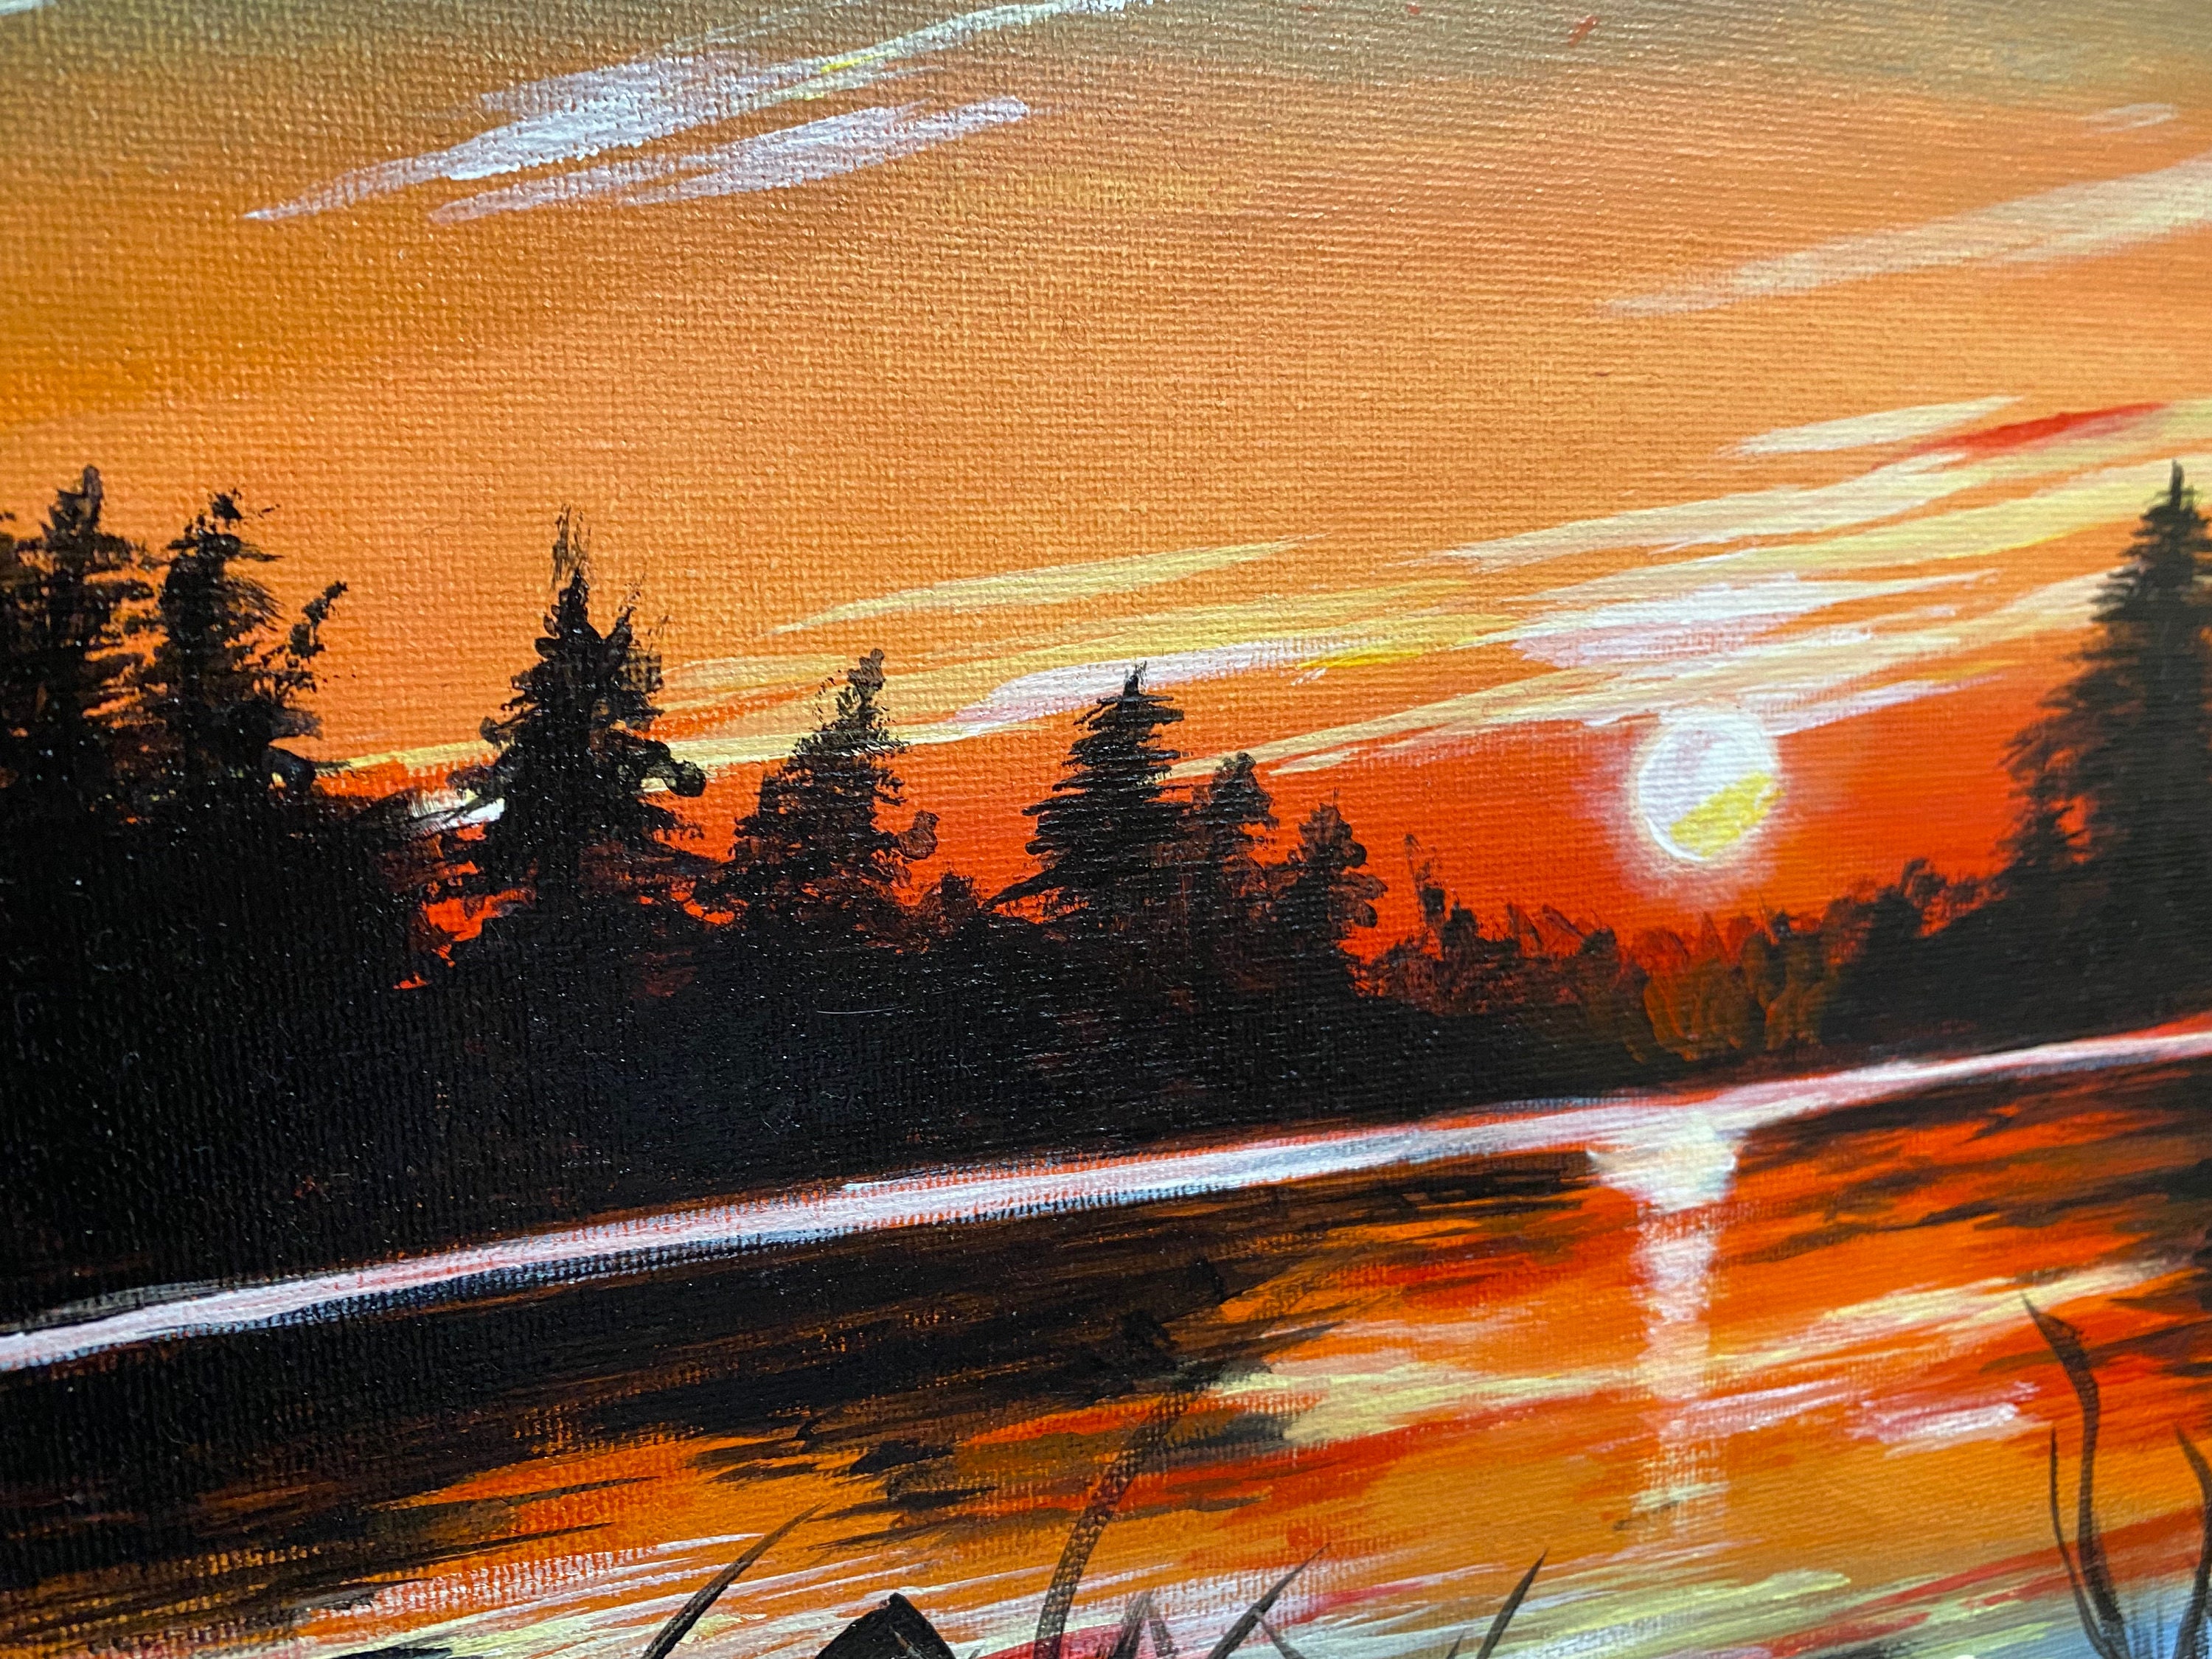 Dakshina Art Sunset landscape painting Acrylic 12 inch x 8 inch Painting  Price in India - Buy Dakshina Art Sunset landscape painting Acrylic 12 inch  x 8 inch Painting online at